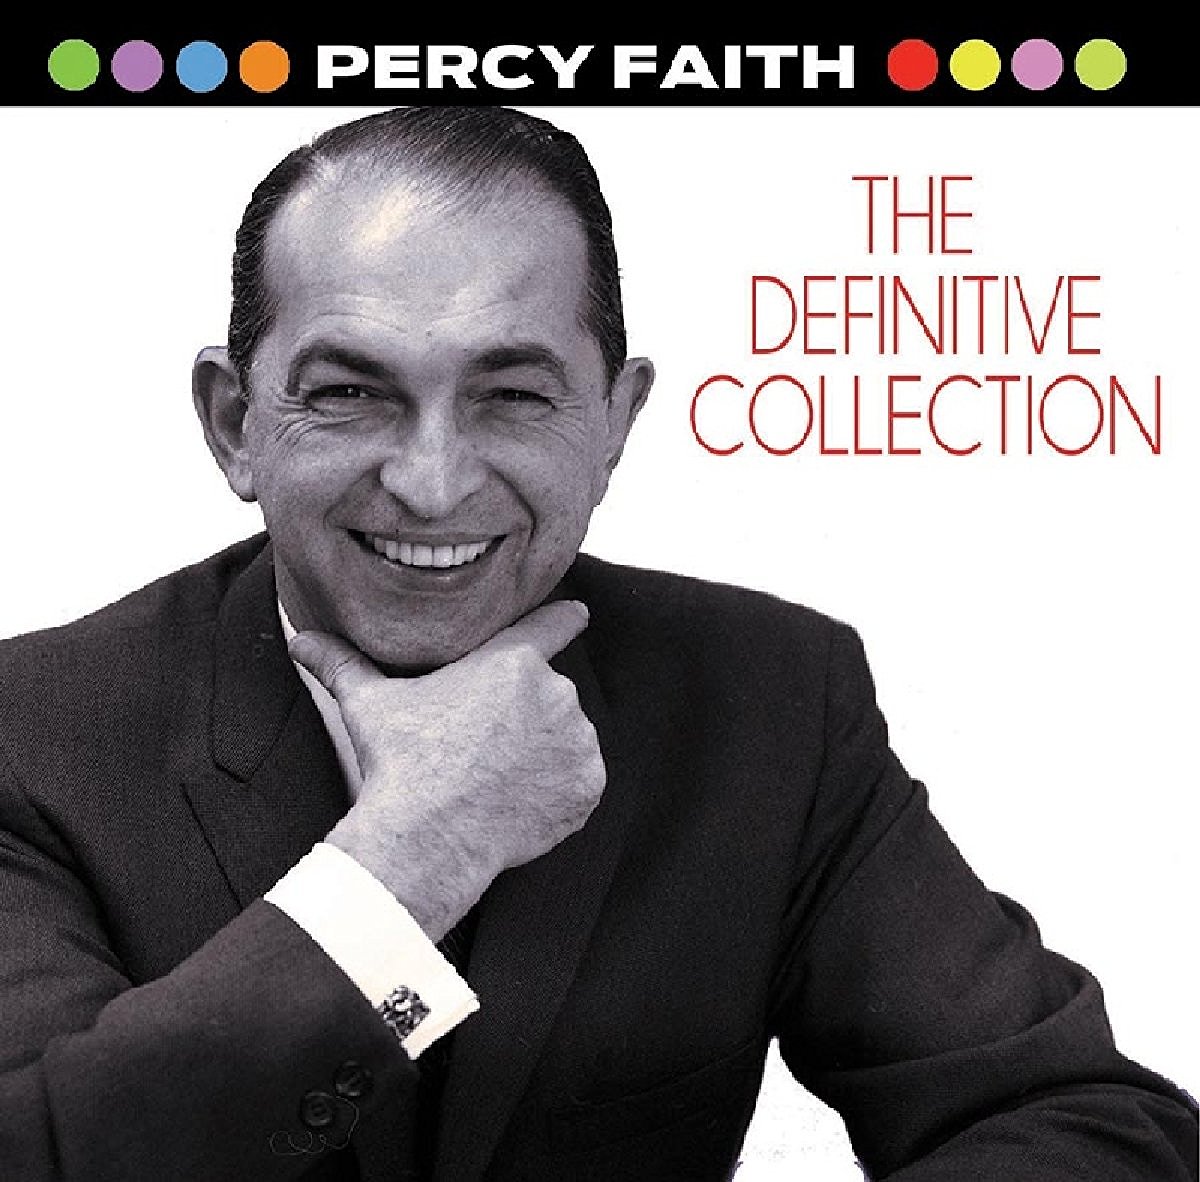 The Definitive Collection (2-CD set)